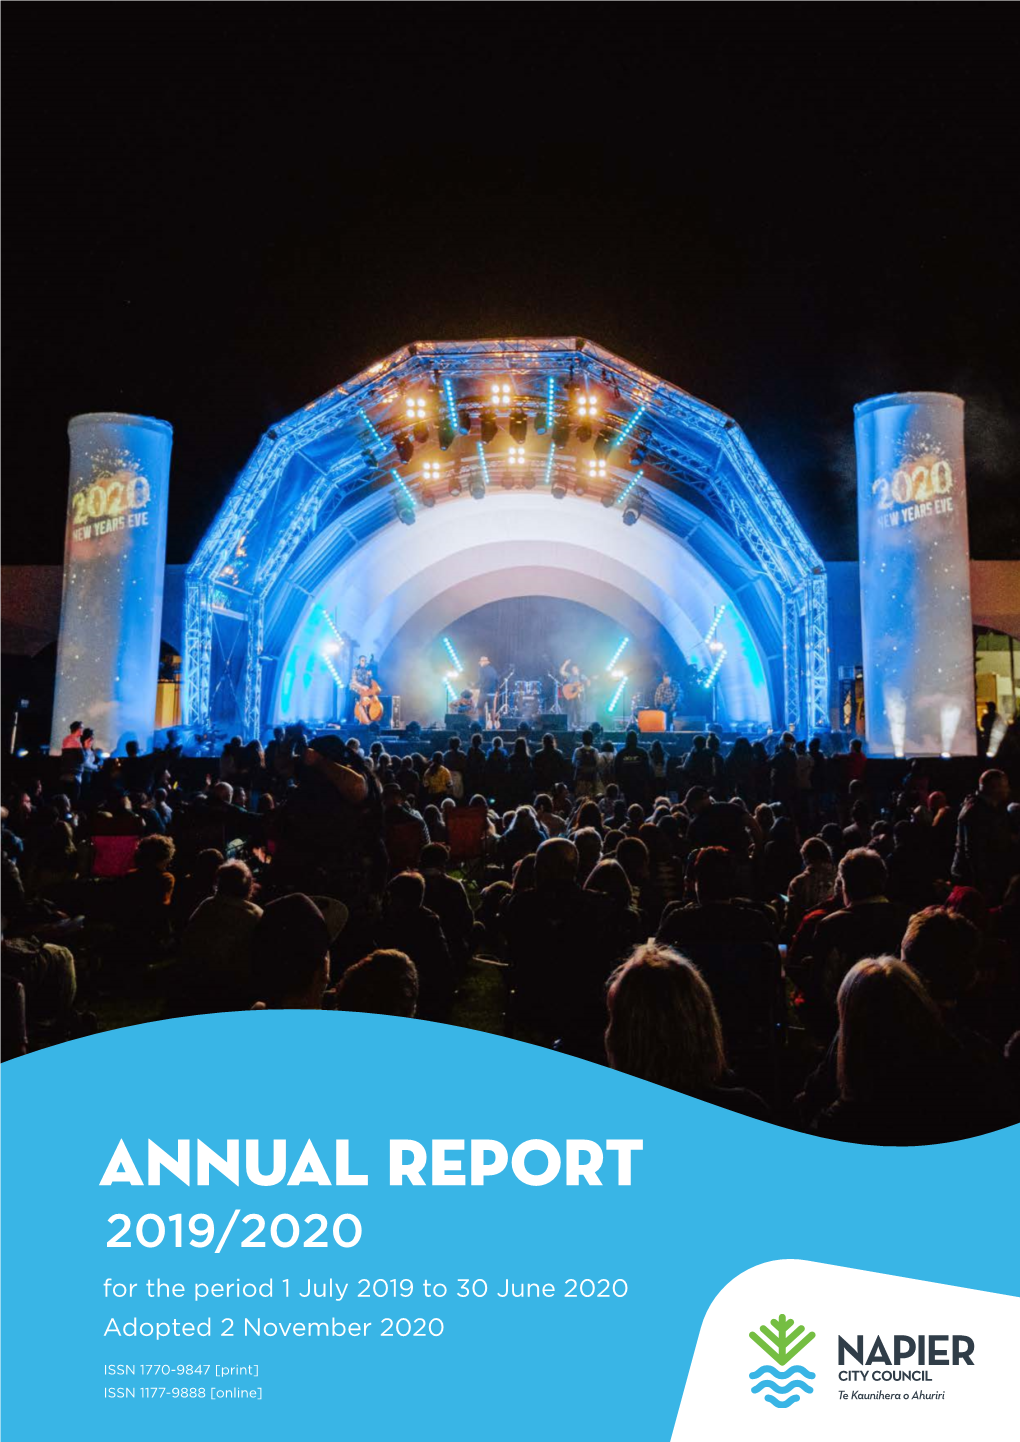 ANNUAL REPORT 2019/2020 for the Period 1 July 2019 to 30 June 2020 Adopted 2 November 2020